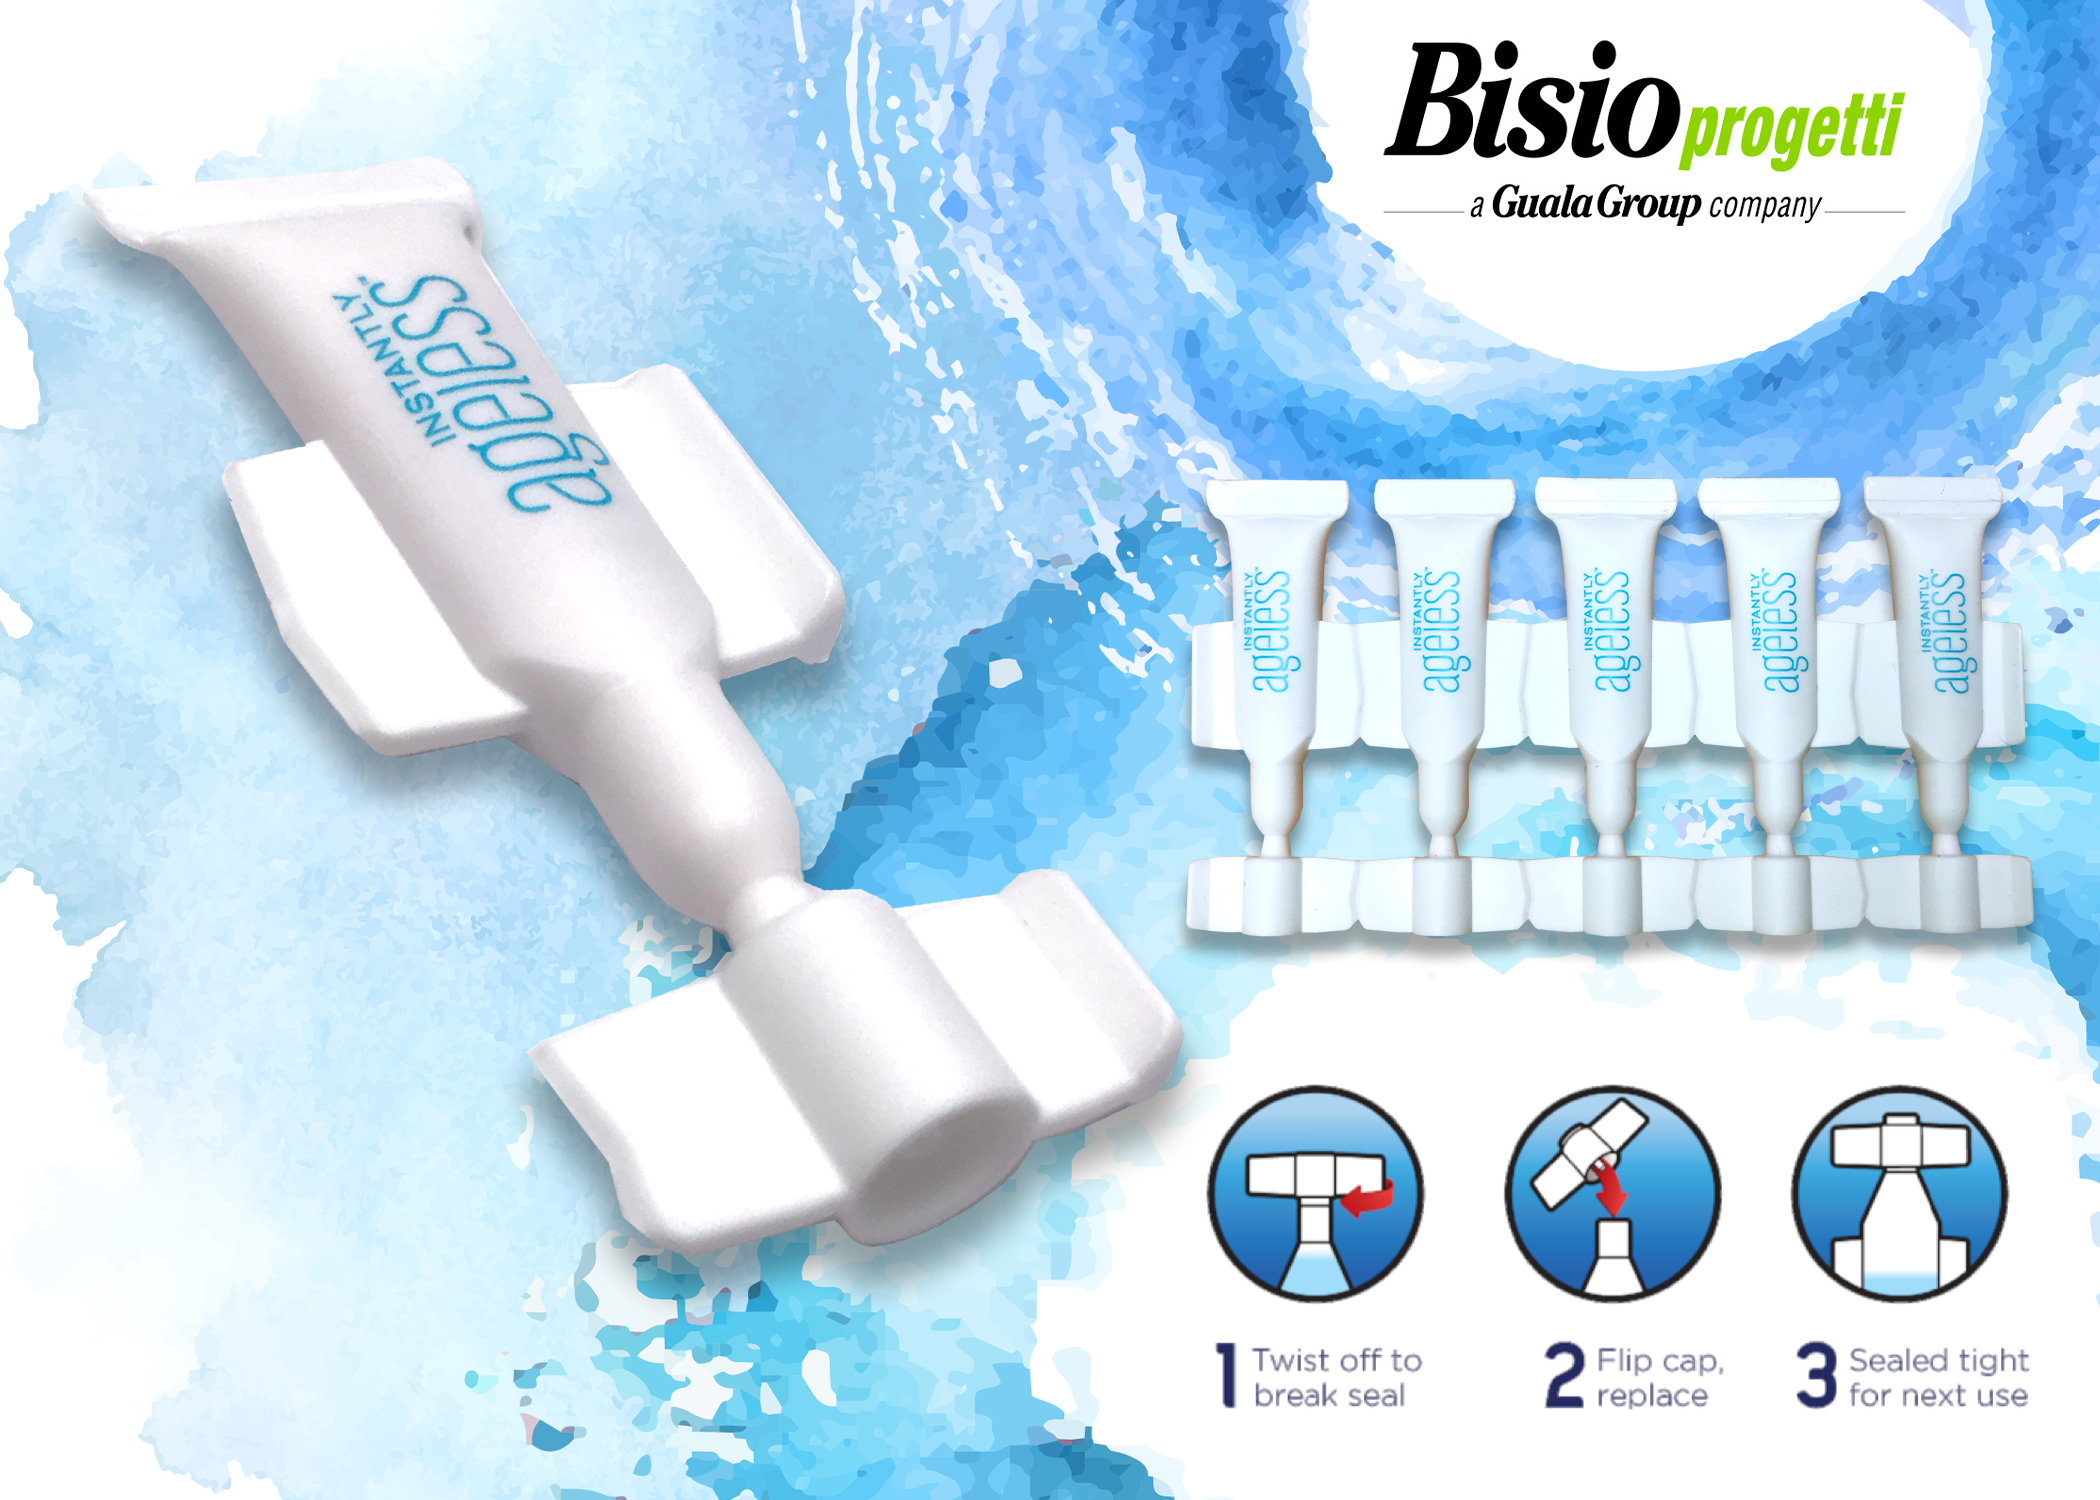 The strips, from Bisio Progetti, A Division of the Guala Group, consists of five resealable breakaway vials in sizes from 0.3 to 10.0 milliliters.